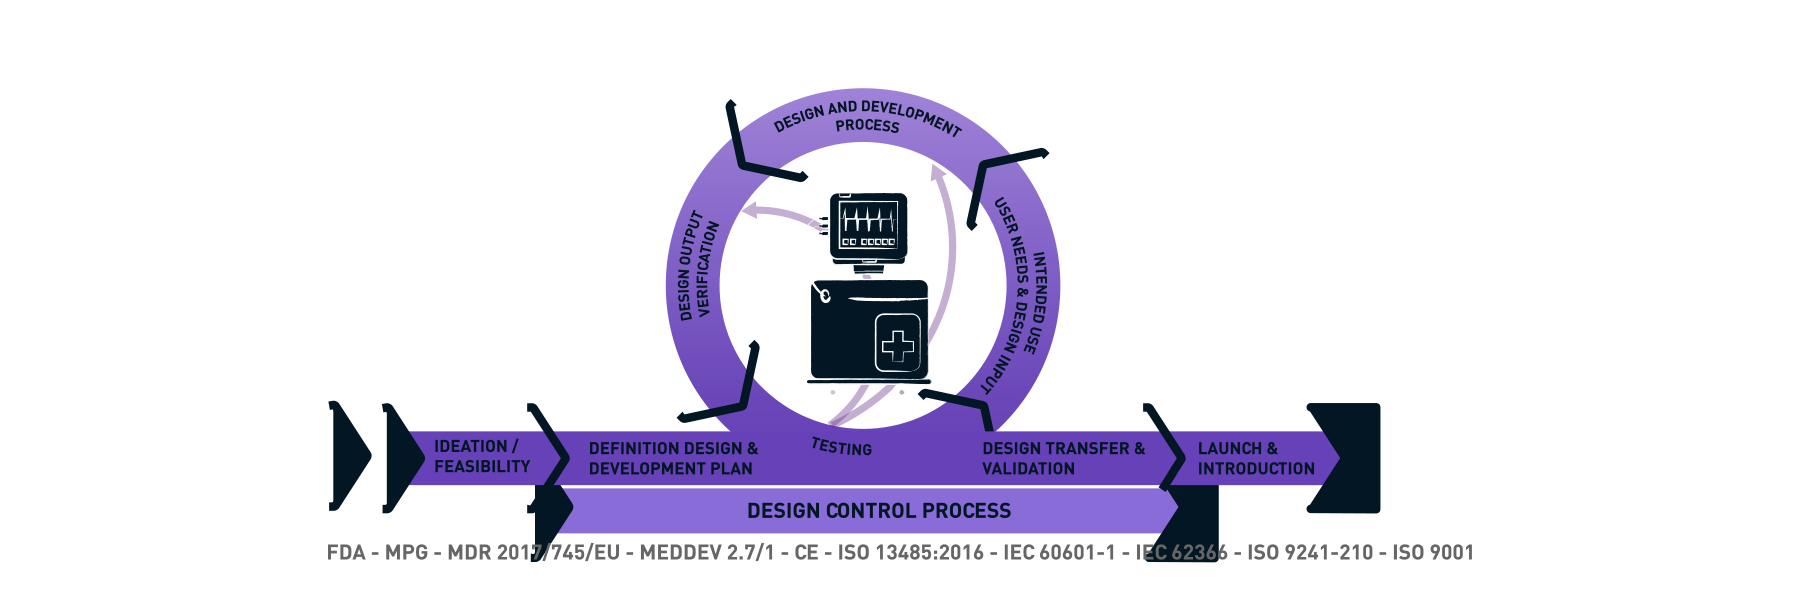 Graphics on the topic, control of the design process